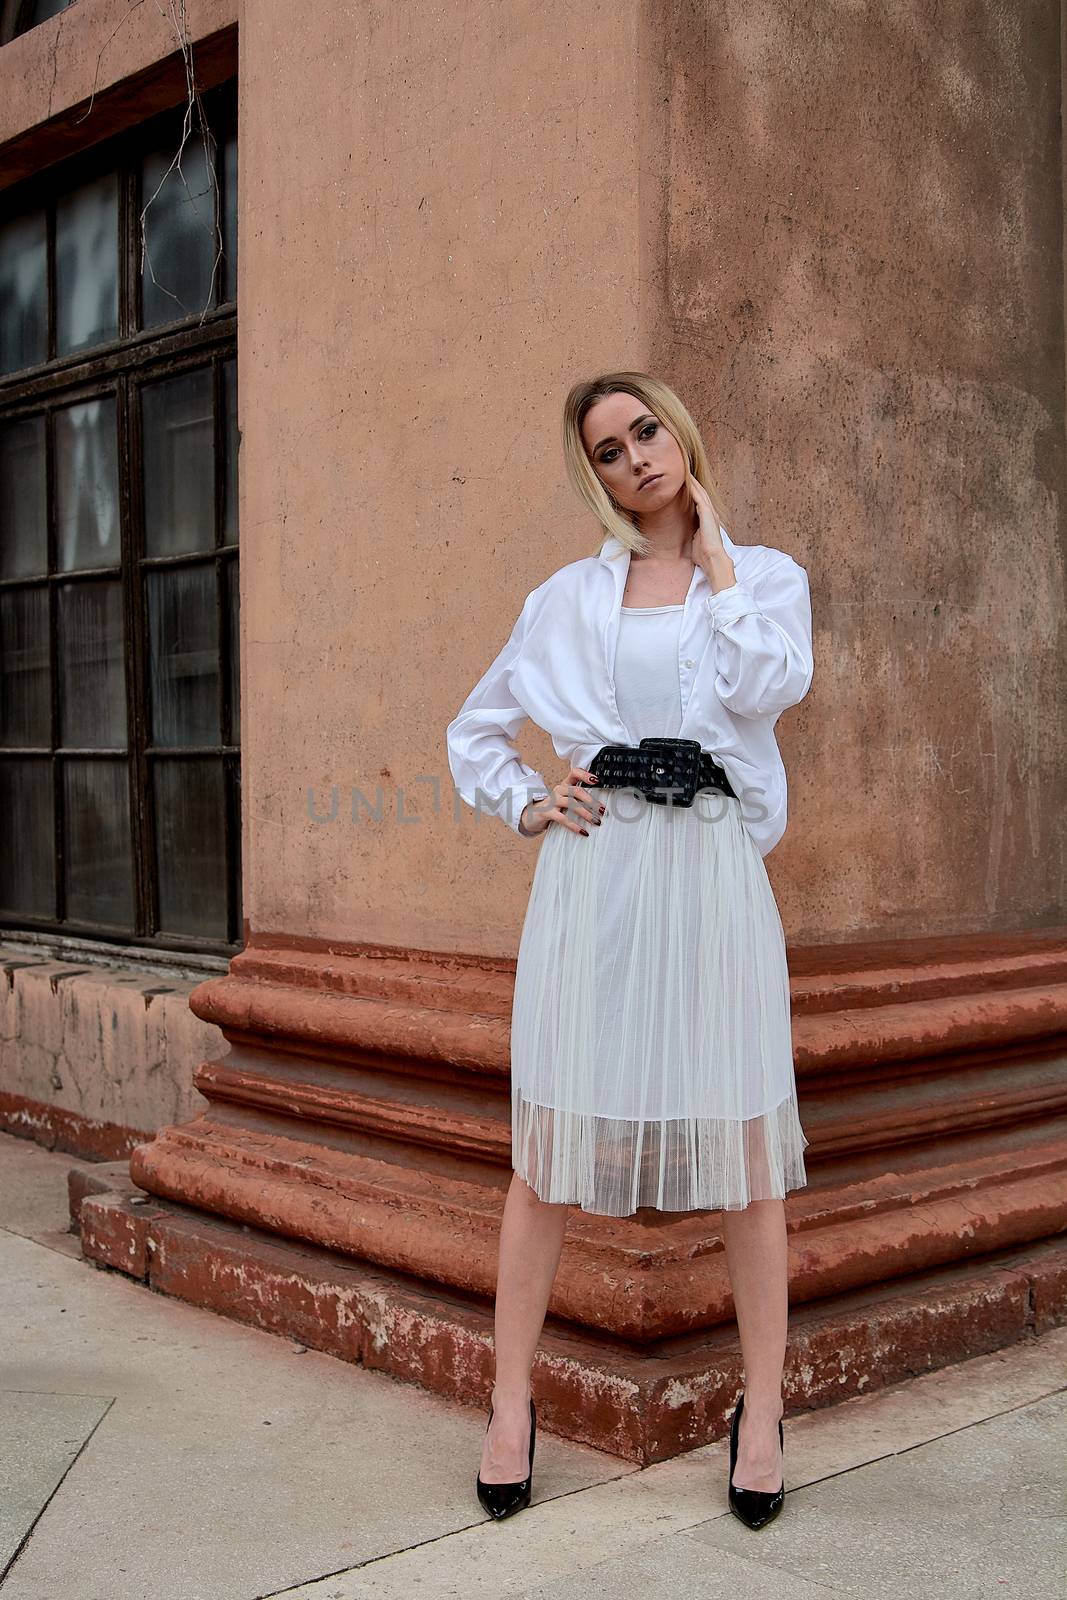 Fashion look's woman. Young woman modern portrait. Young woman dressed in white skirt and shirt posing near the old looking soviet union's architectural building with large pillars and bas-reliefs.